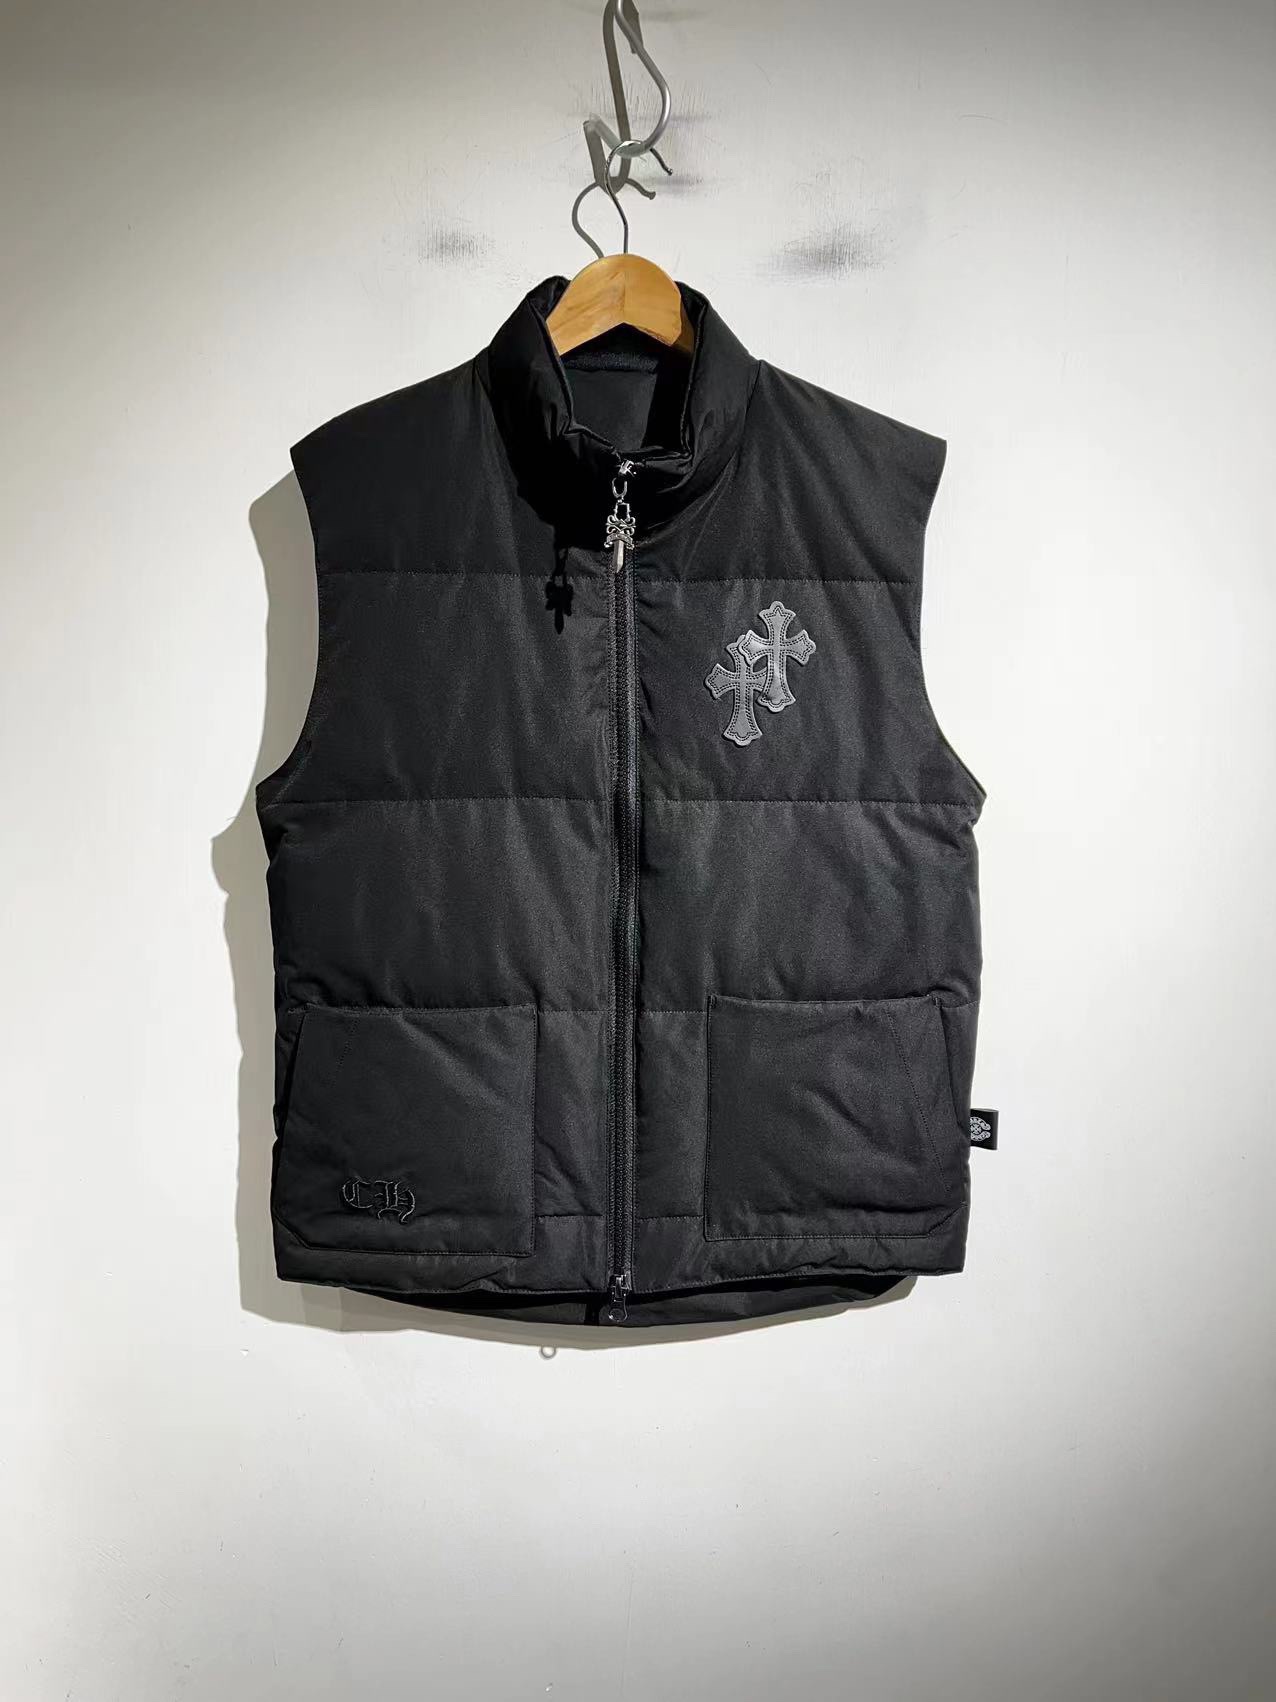 Chrome Hearts Clothing Waistcoats Black White Sewing Genuine Leather Goose Down Long Sleeve